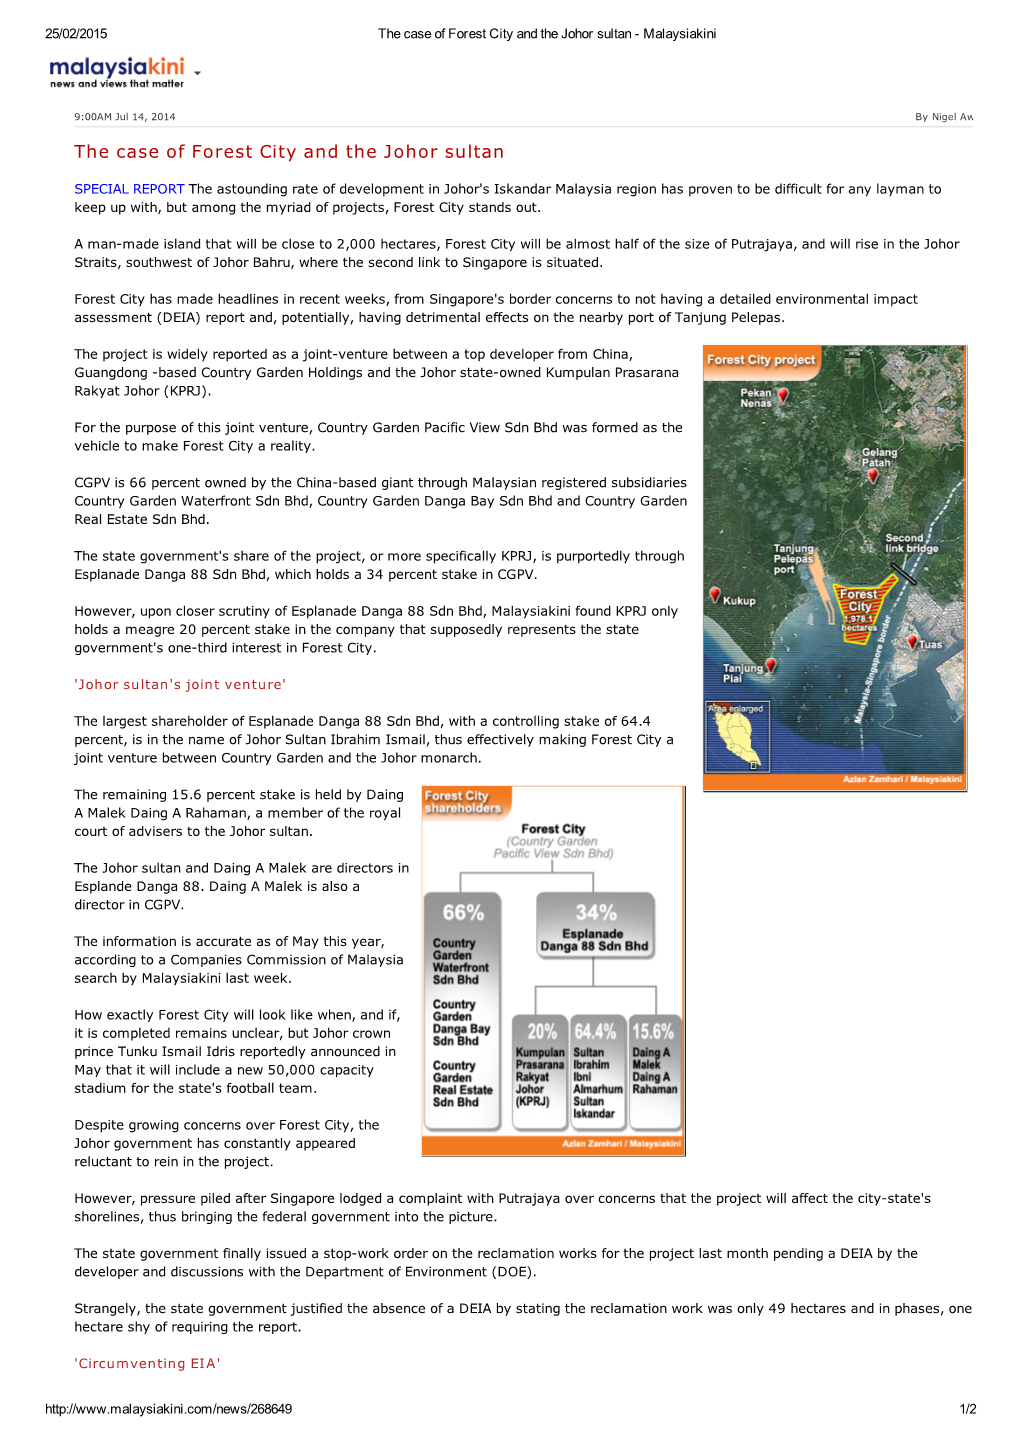 The Case of Forest City and the Johor Sultan - Malaysiakini